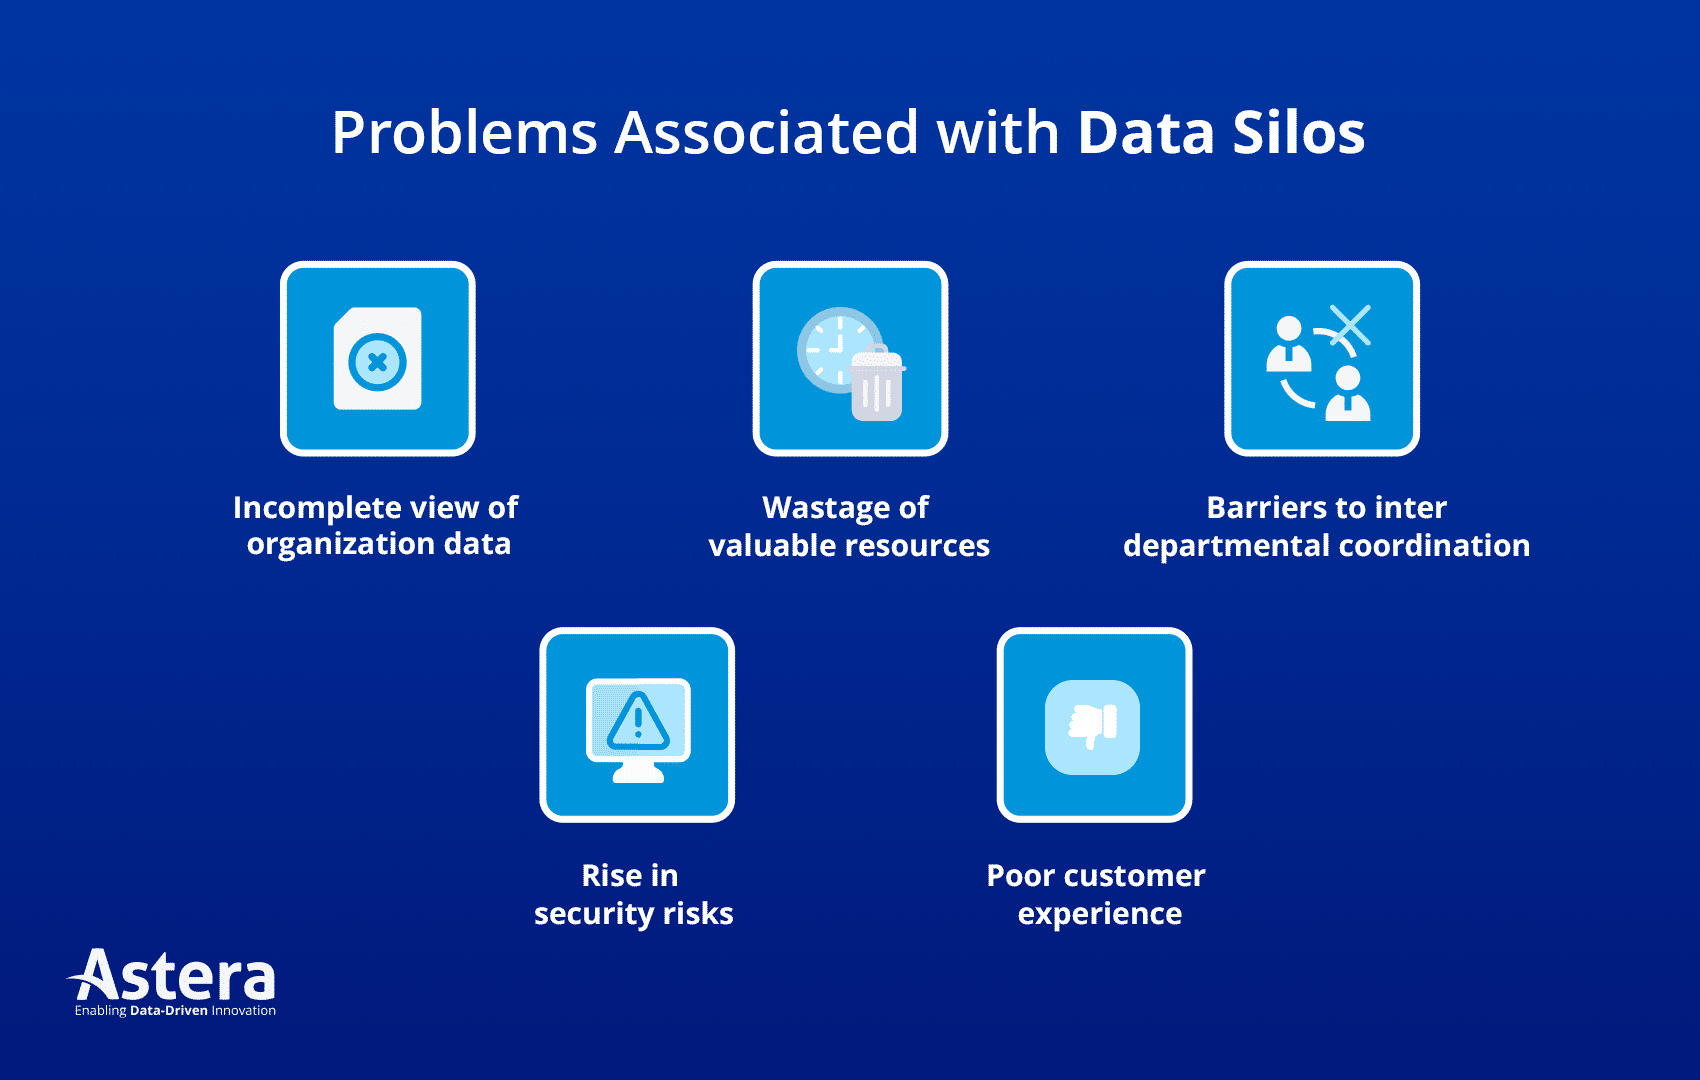 The costs of data silos to an organization